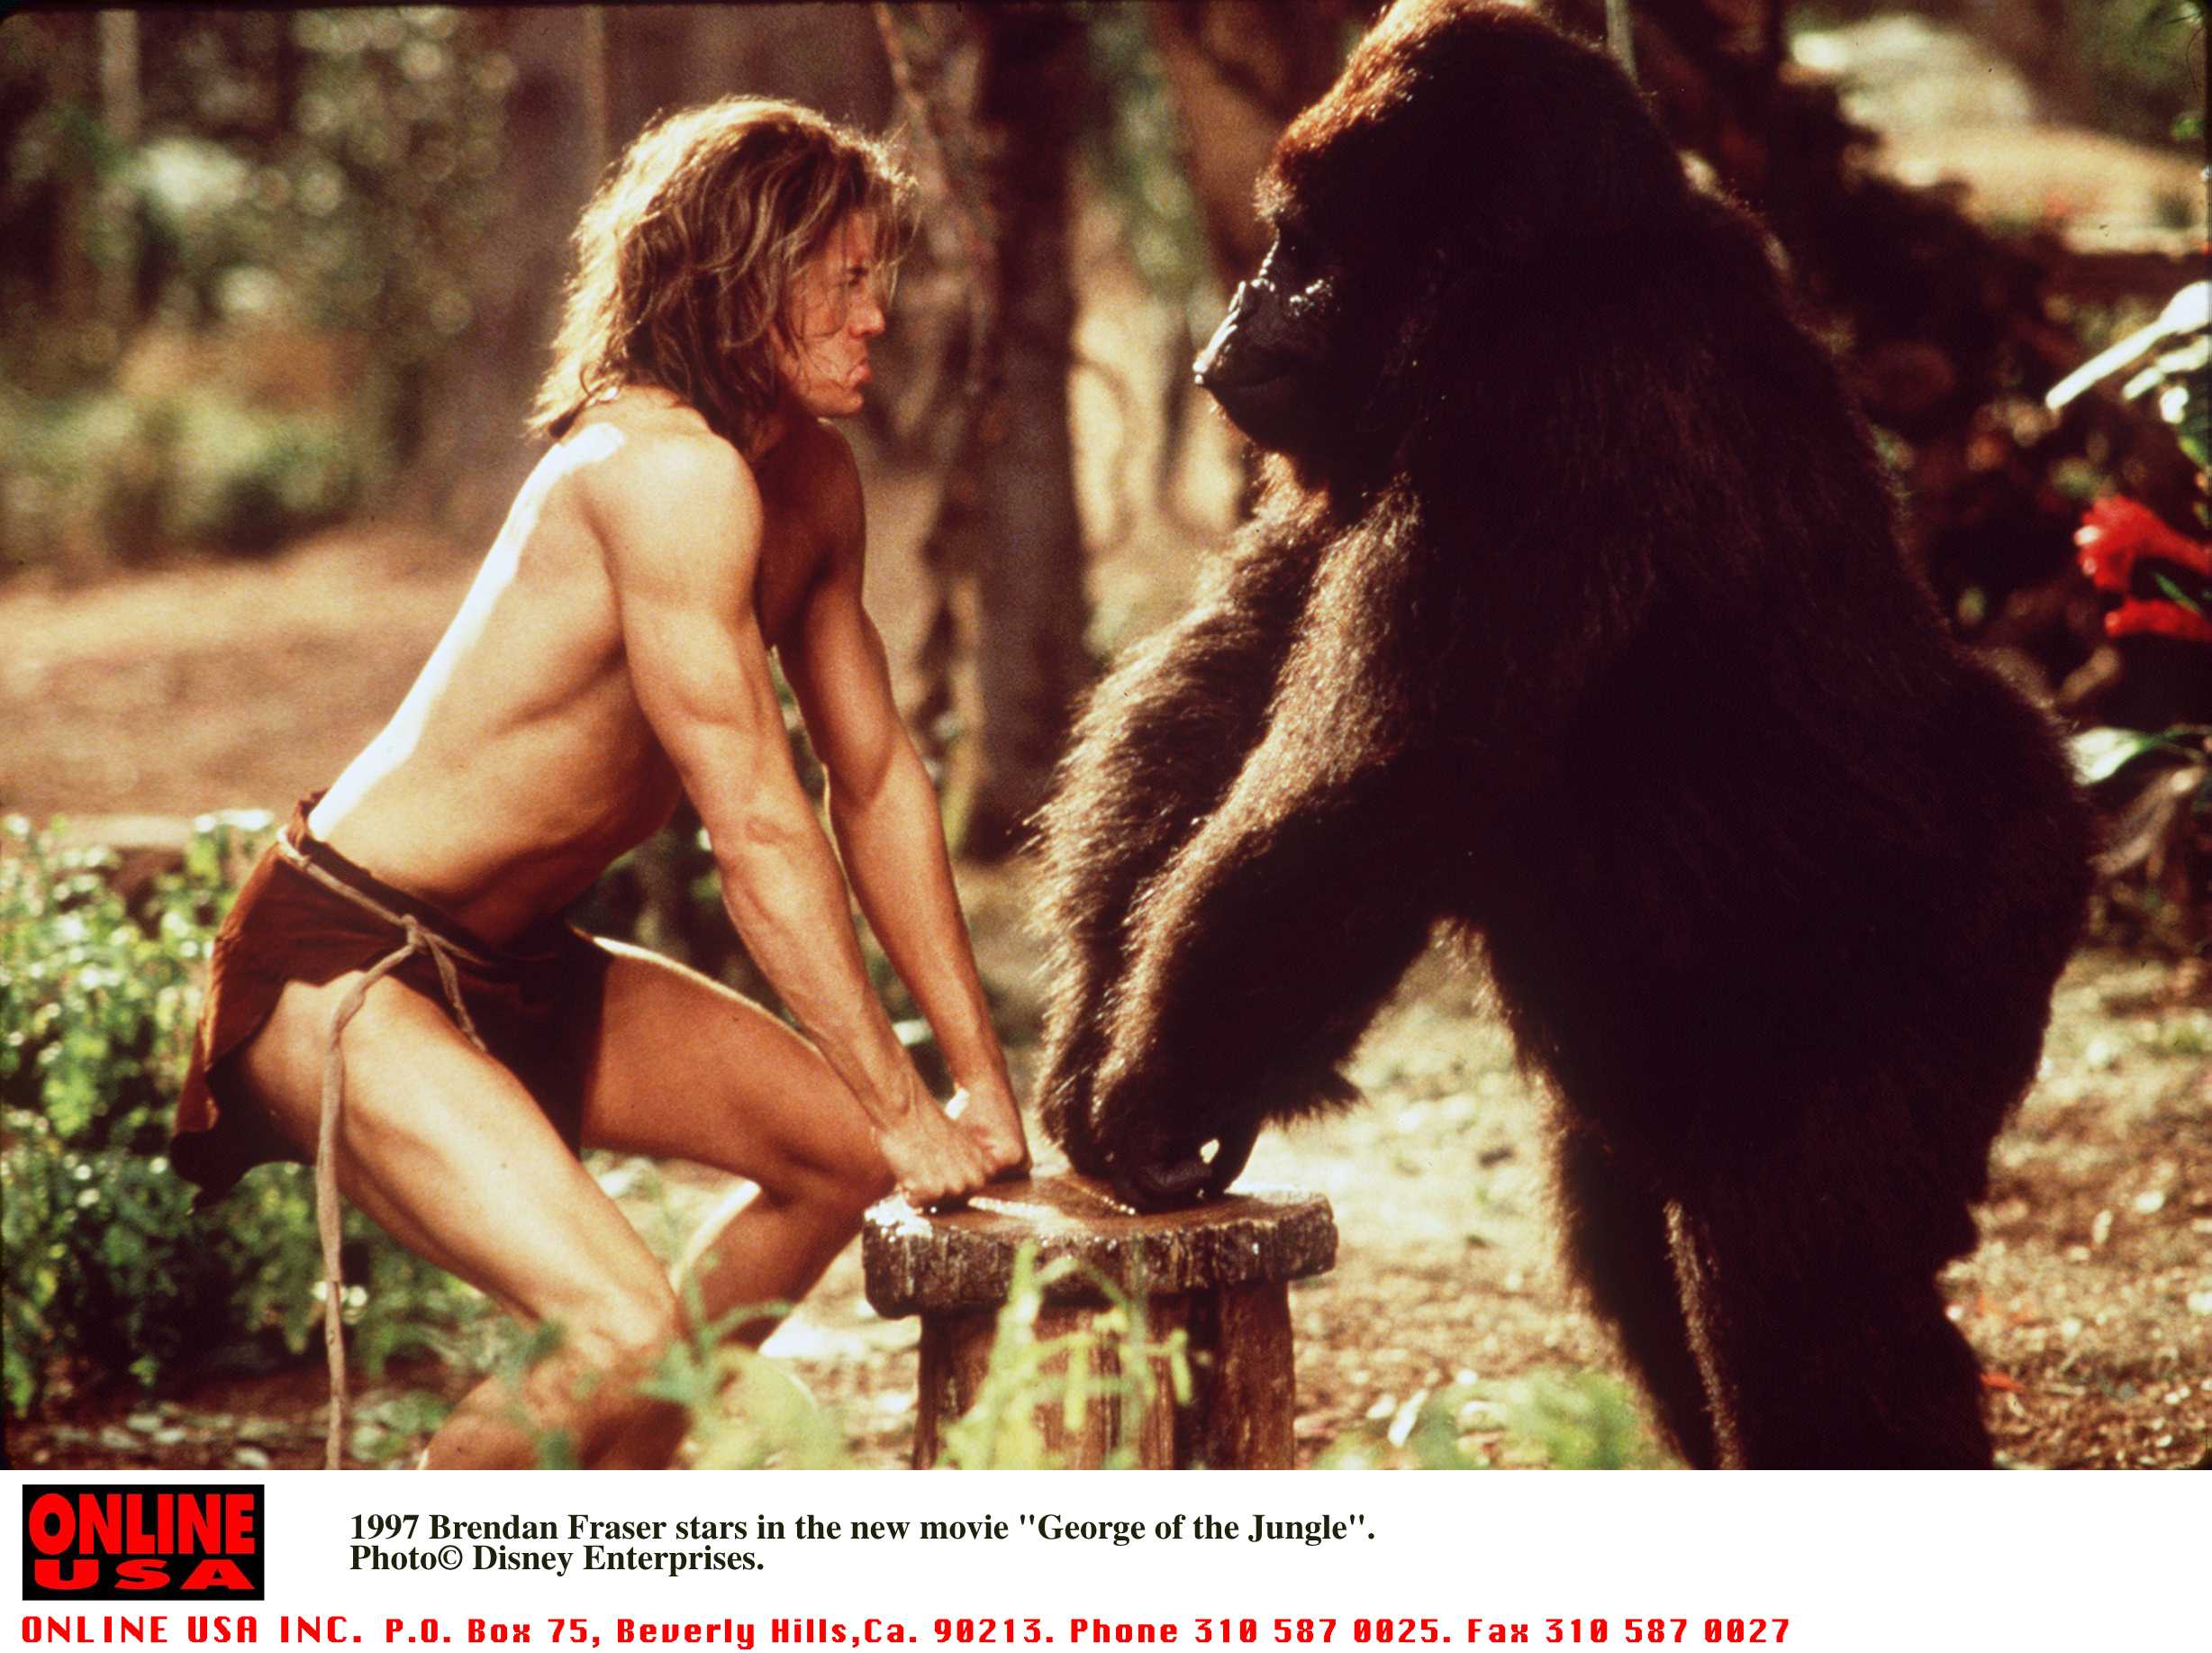 Brendan Fraser starring in the movie "George of the Jungle" June 20, 1997. | Source: Getty Images